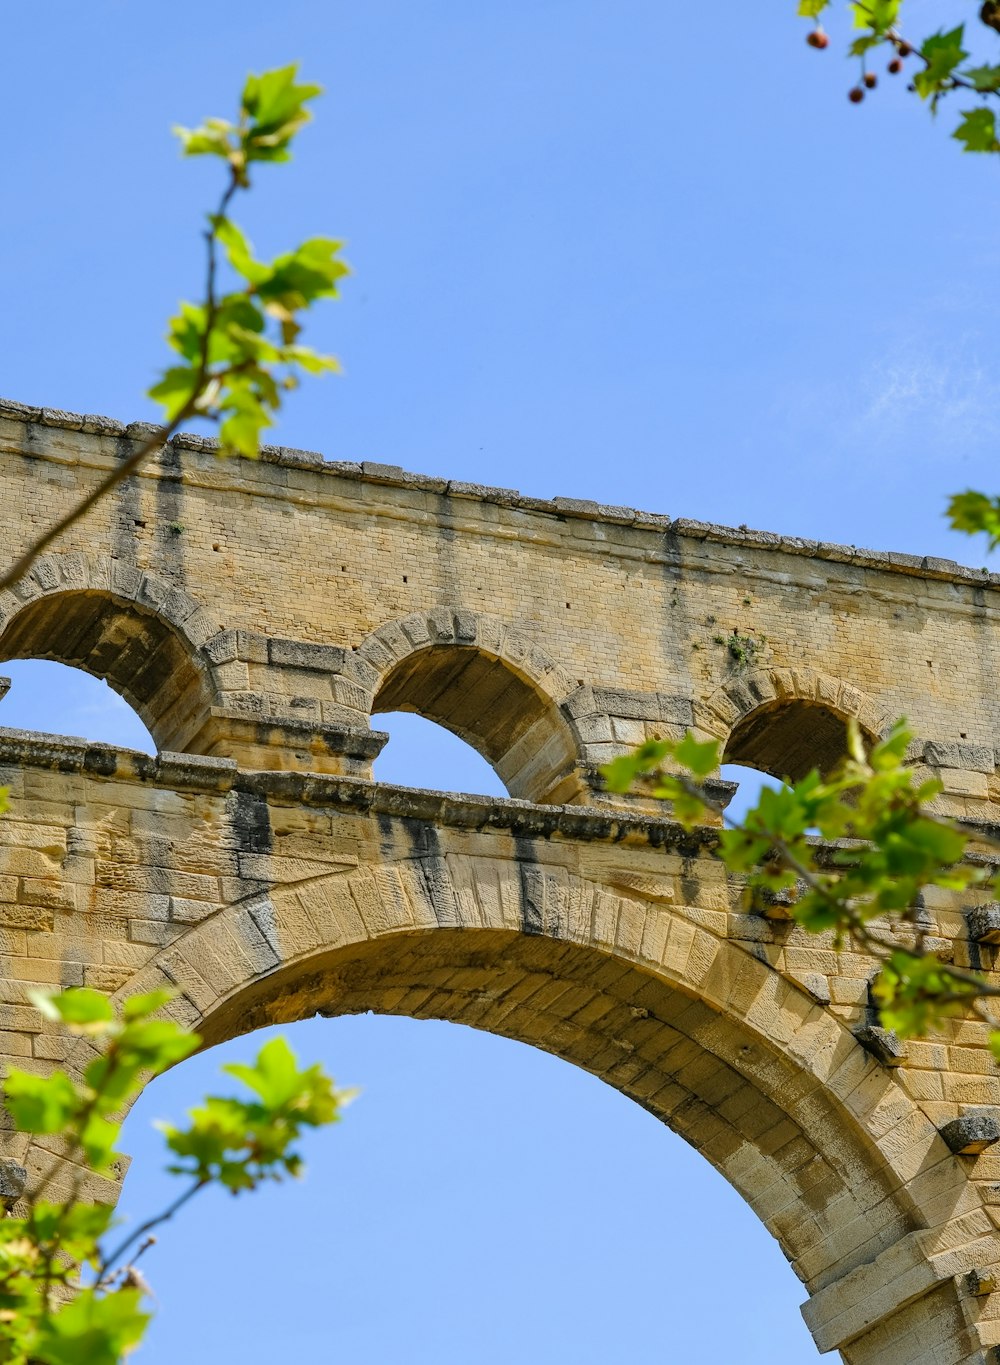 an old stone bridge with arched arches and a blue sky in the background